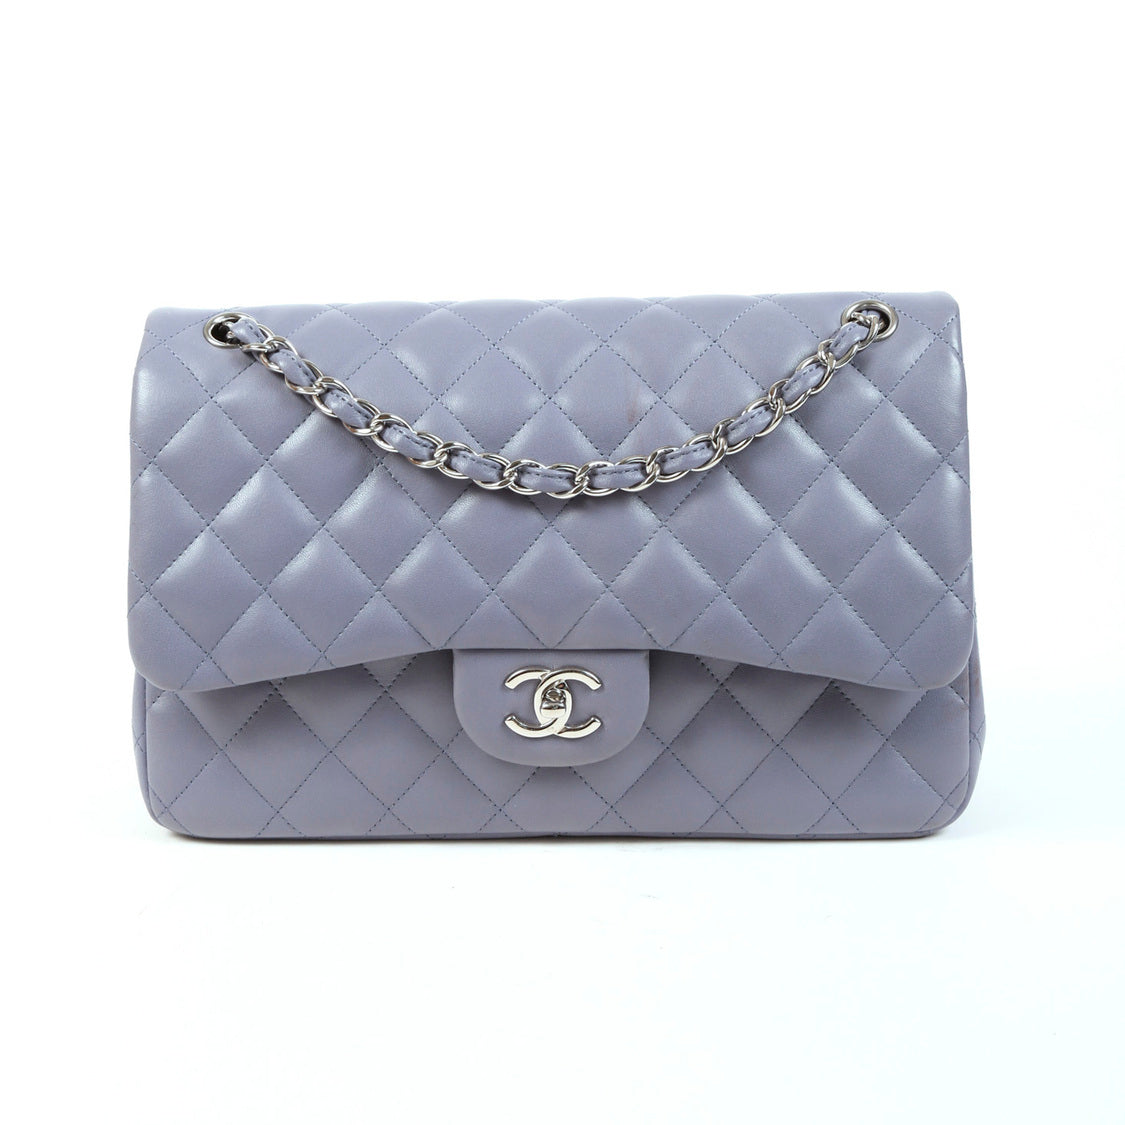 Chanel Green Quilted Lambskin Leather Medium Classic Double Flap